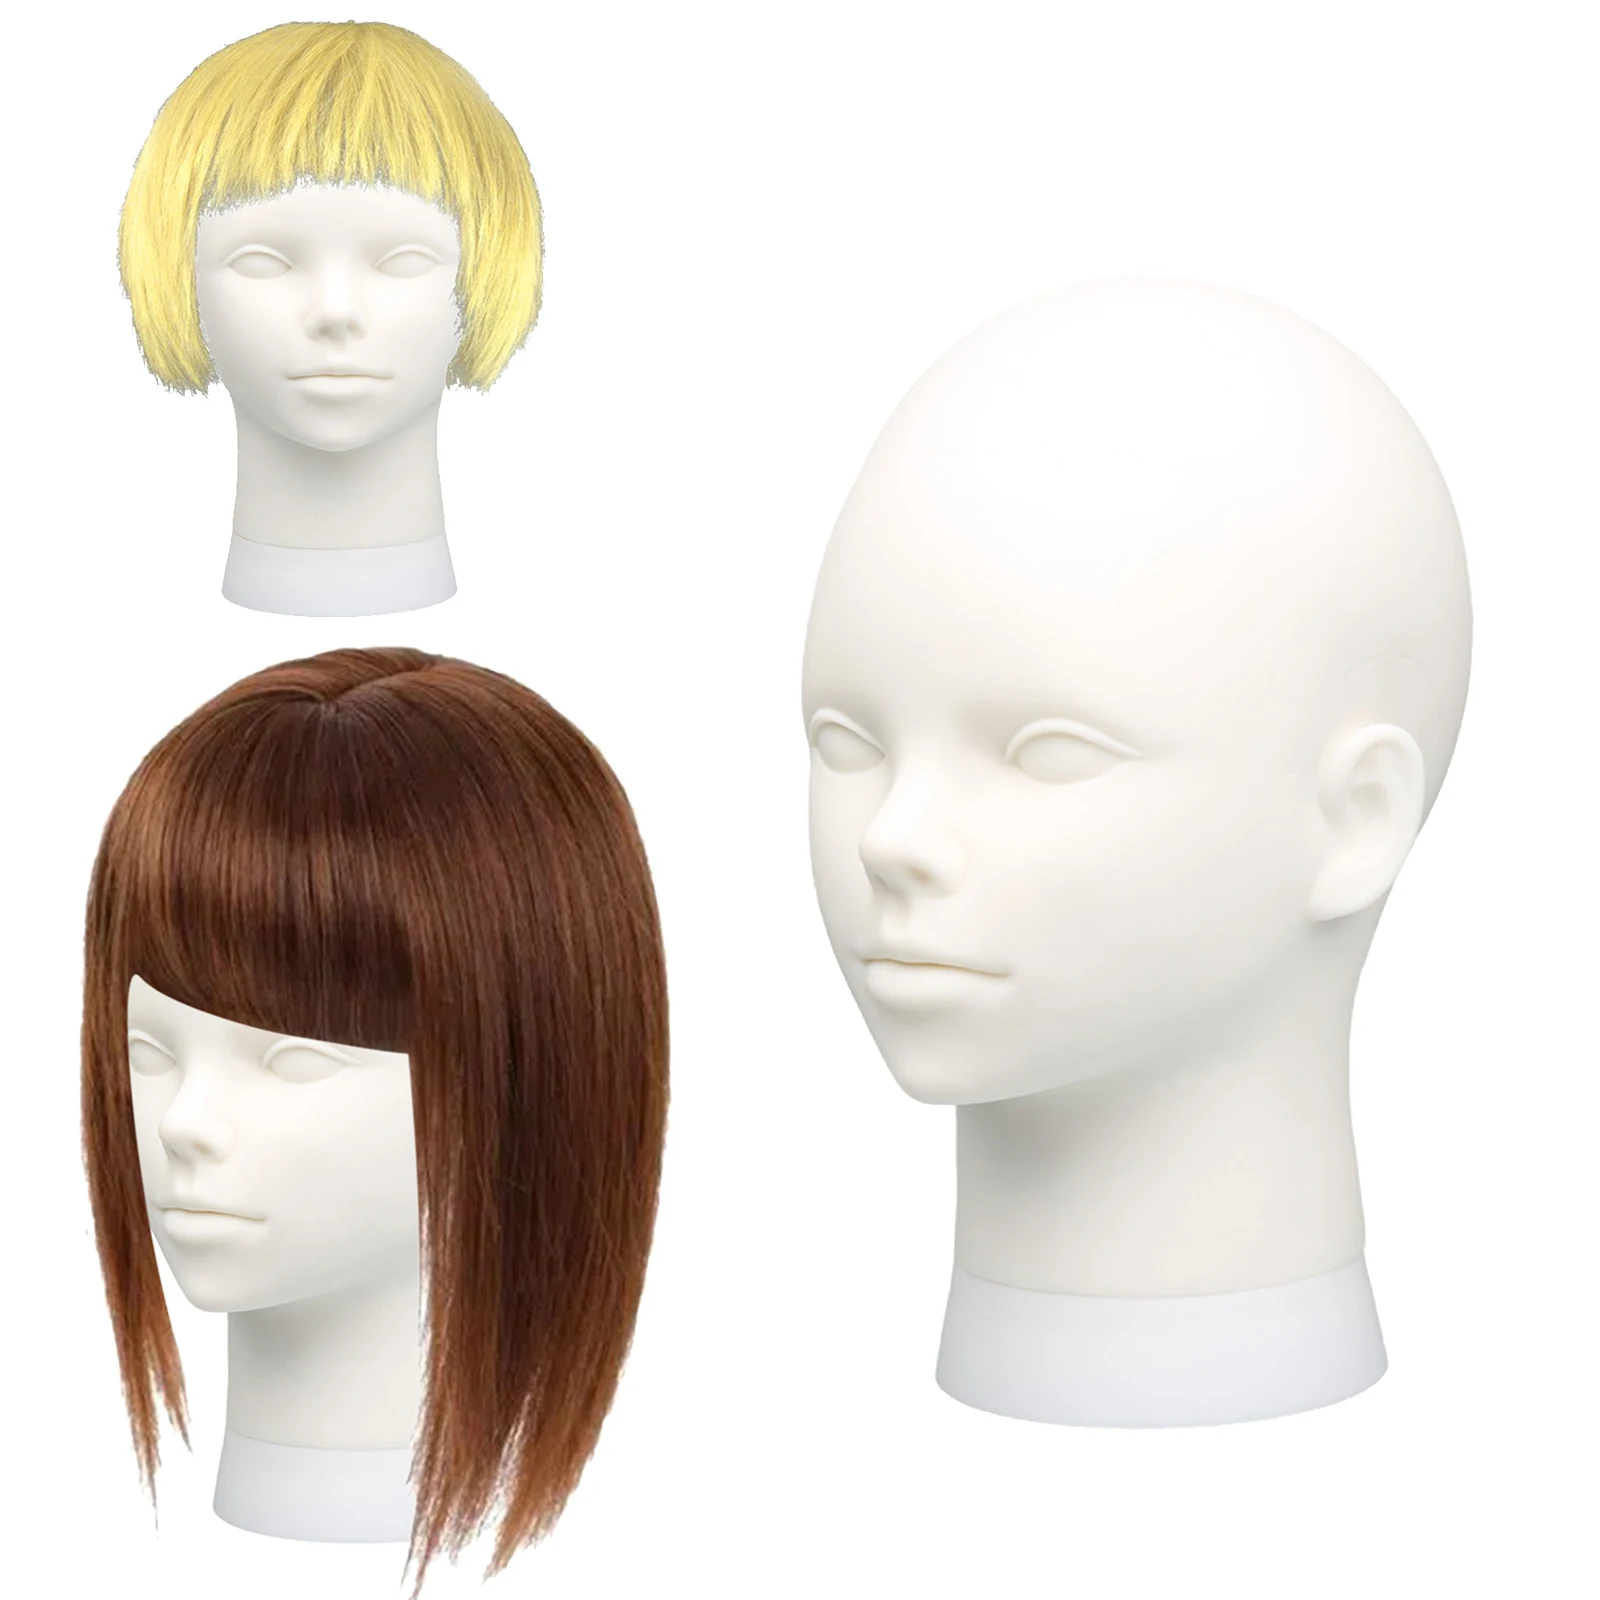 Wig Head Bald Mannequin Head Dummy Wig Stand for Wig Hairpieces Hat Glasses Display Home Travel Cosmetology Practice Training